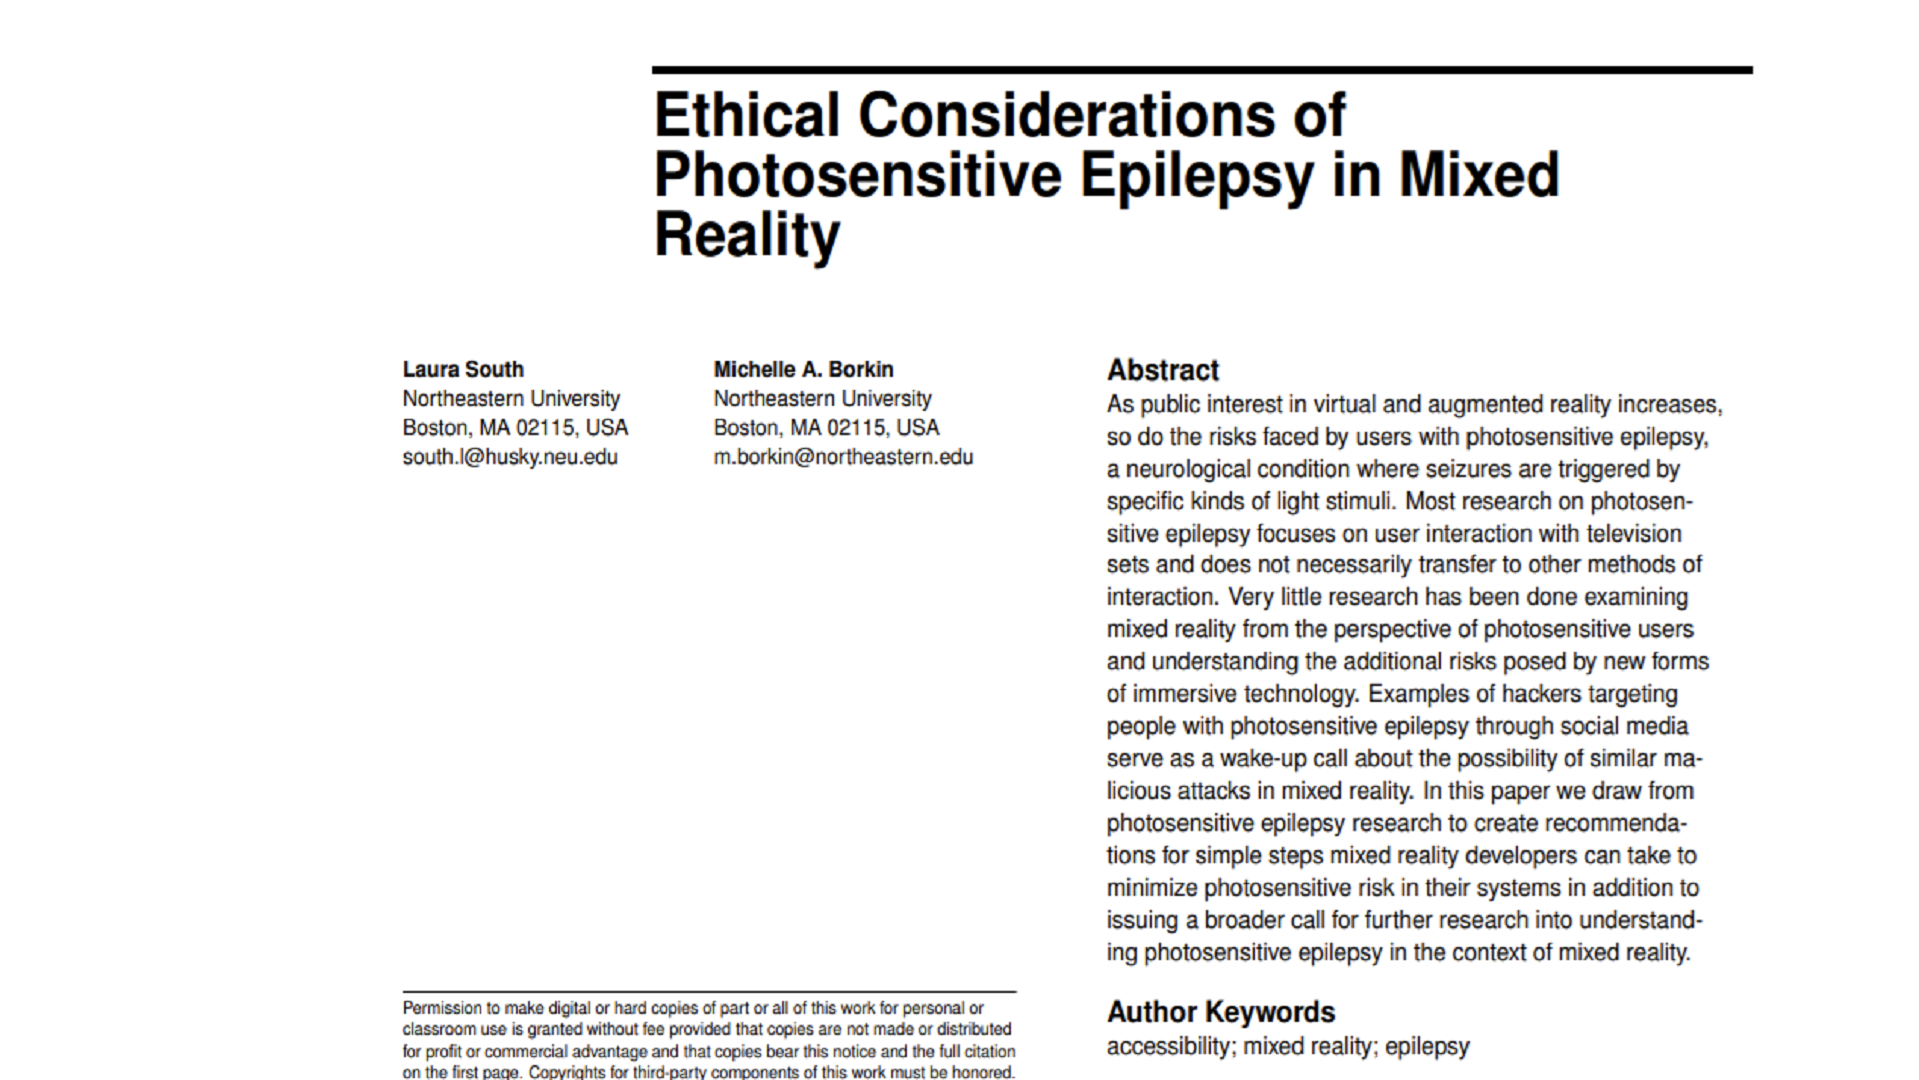 A screengrab of the first page of the paper is shown. The title of the paper is 'Ethical considerations of photosensitive epilepsy in mixed reality' and the authors are Laura South and Michelle A. Borkin.